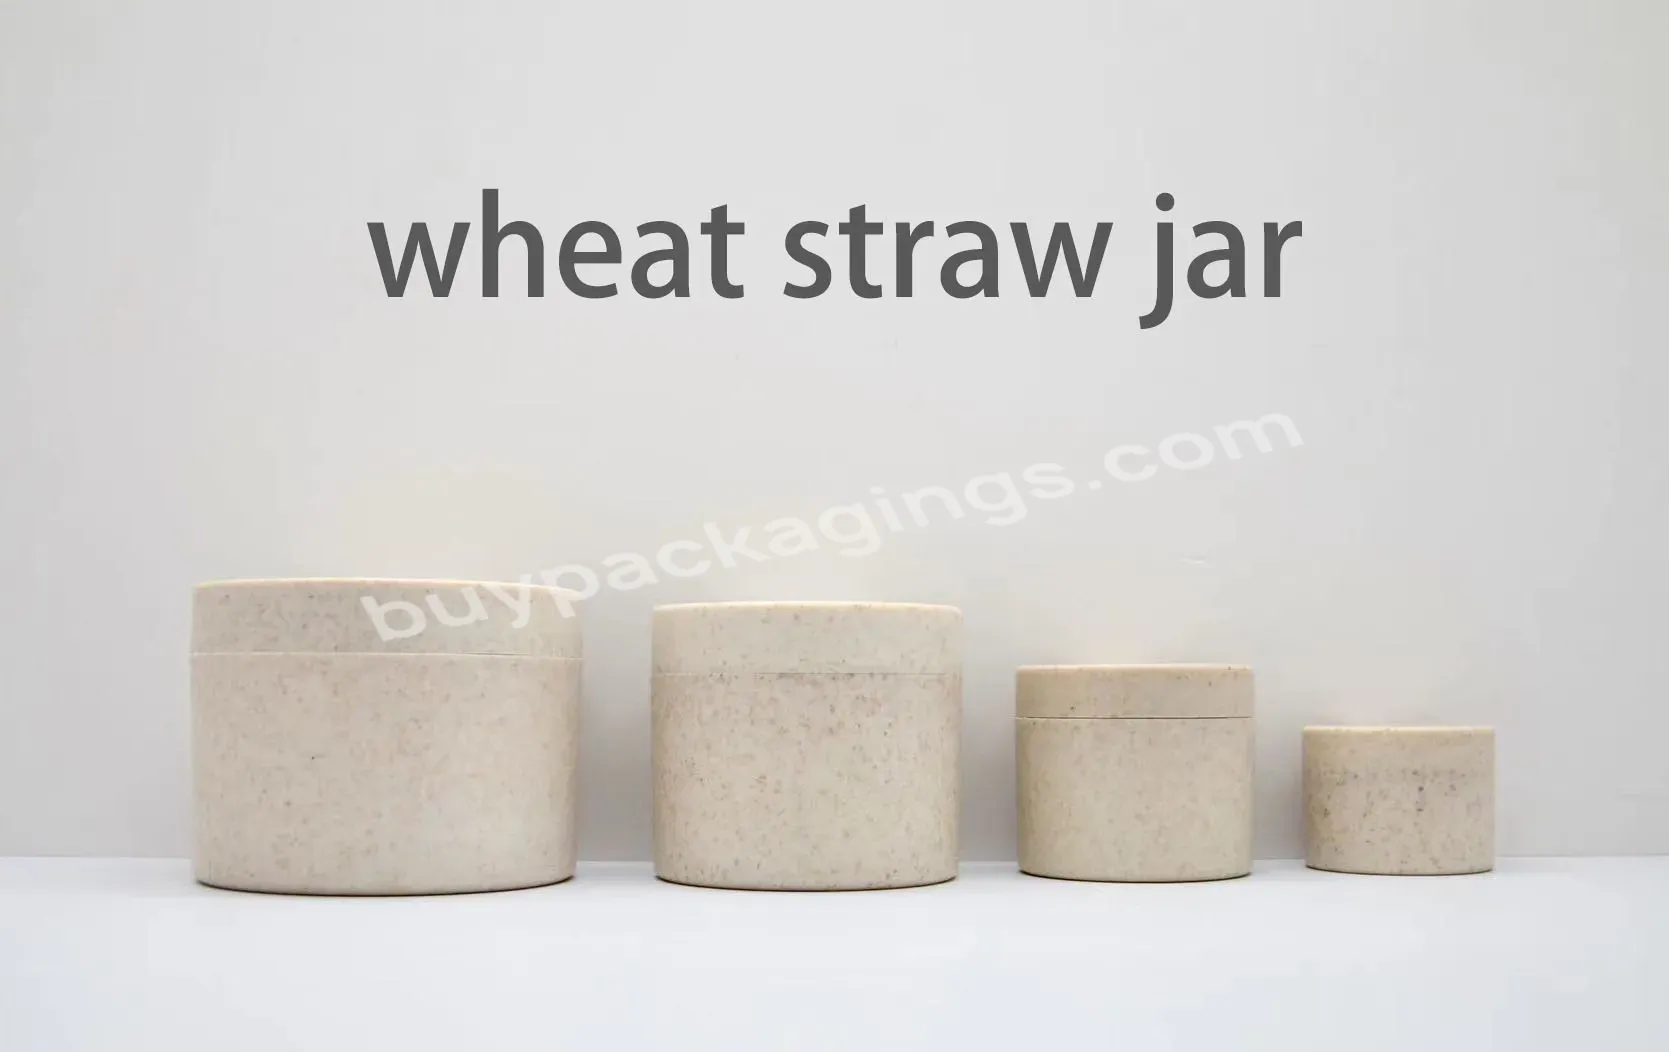 Eco Friendly 30g 50g 100g 200g 250g 100% Biodegradable Green Wheat Straw Jar Cosmetic Cream Container - Buy 100% Custom Biodegradable Jar Cosmetic Packaging 30g 50g 100g 250g Pla Cosmetic Makeup Cream Jar,Eco Friendly Wheat Straw Cosmetic Packaging J